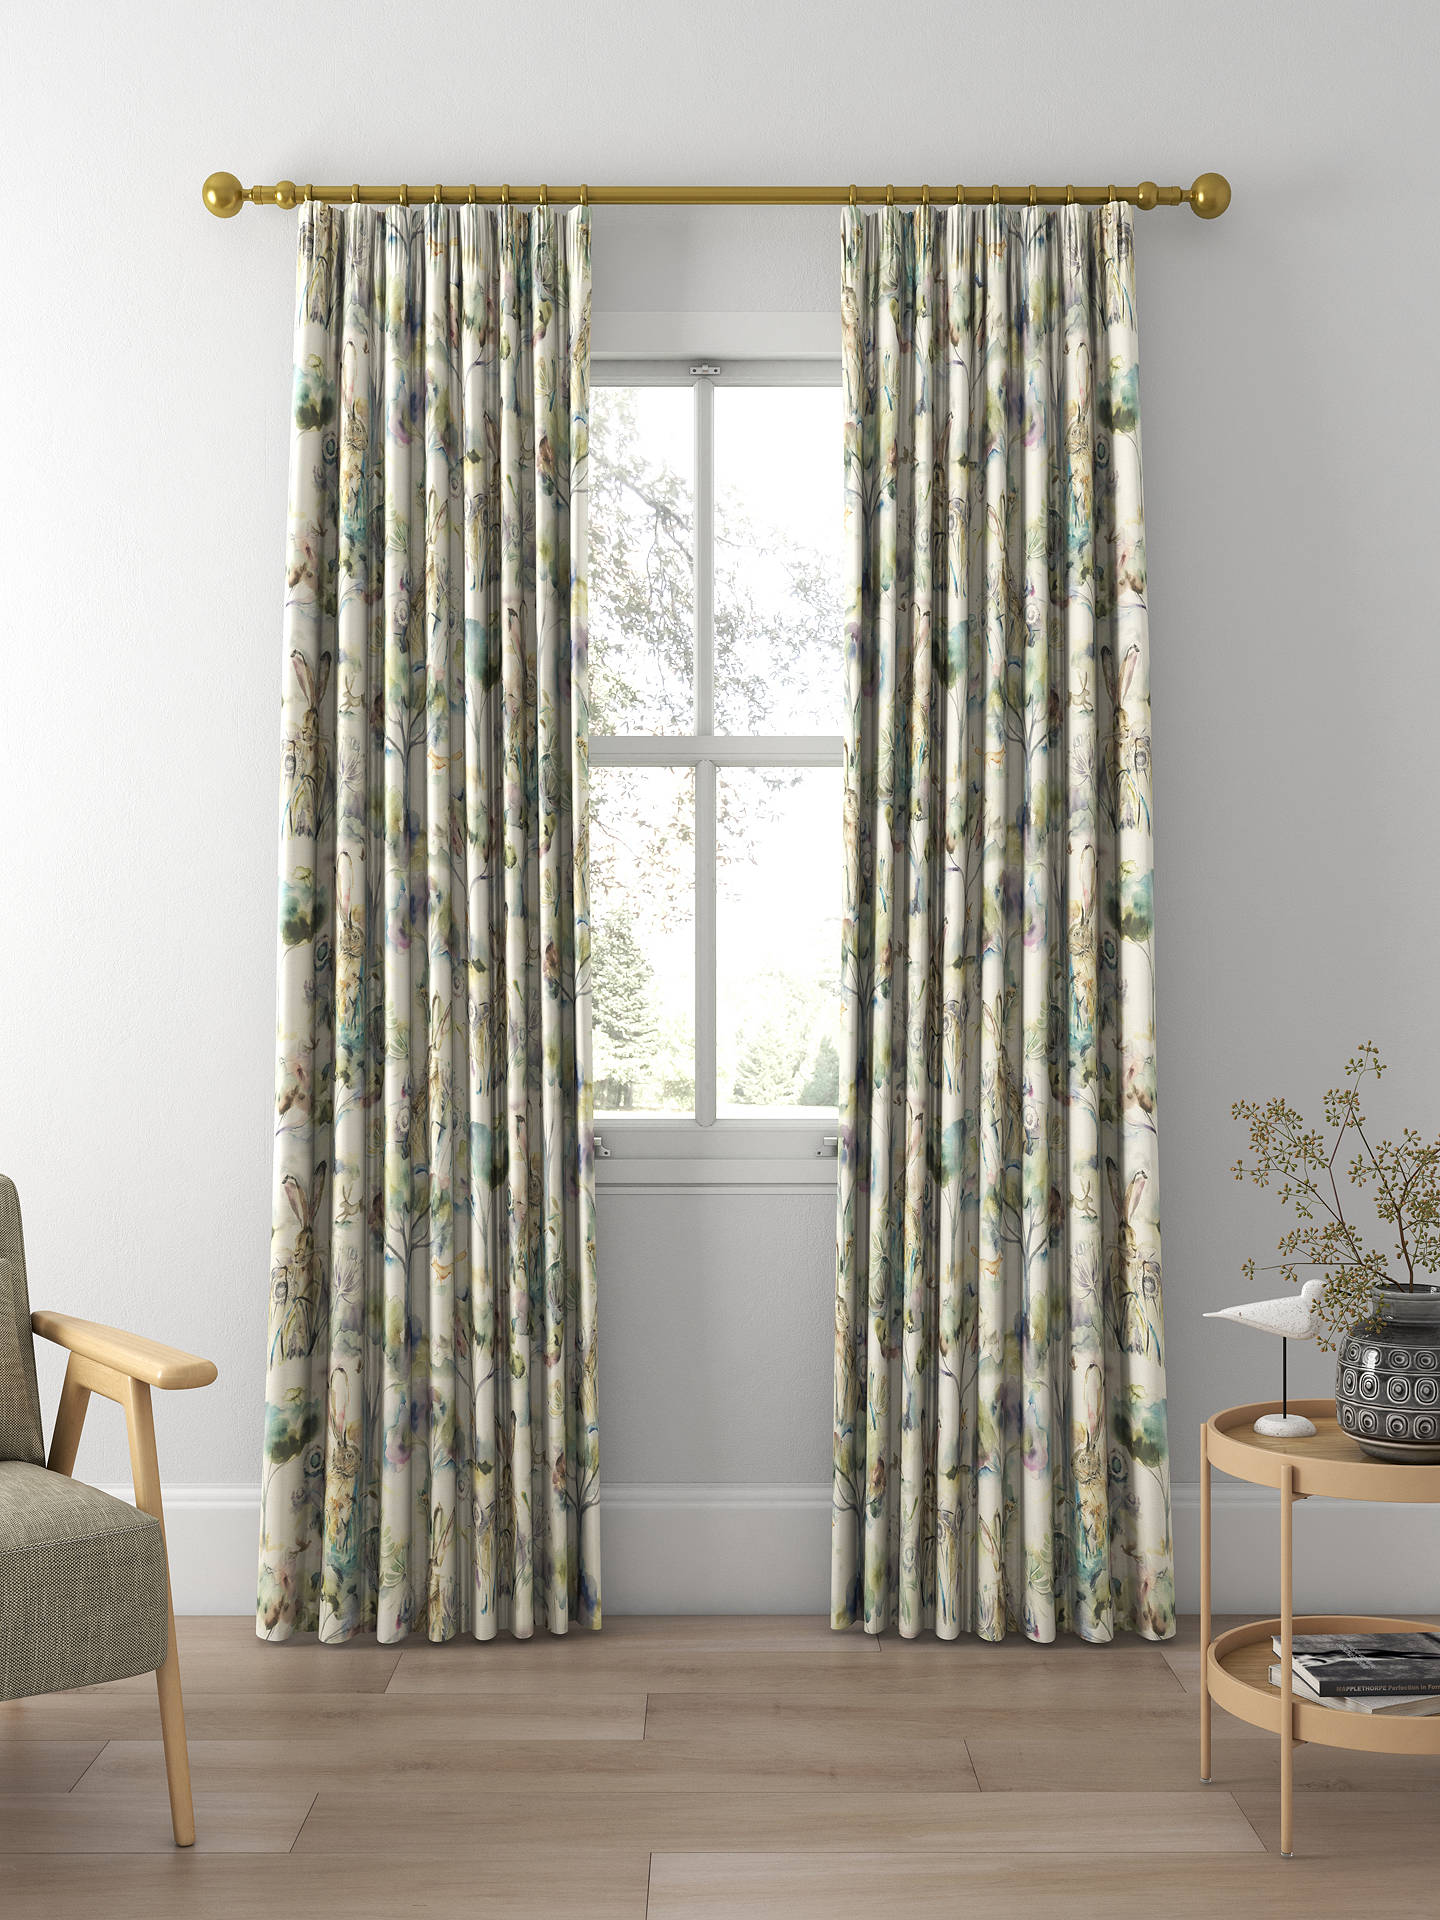 Voyage Grassmere Made to Measure Curtains, Sweetpea